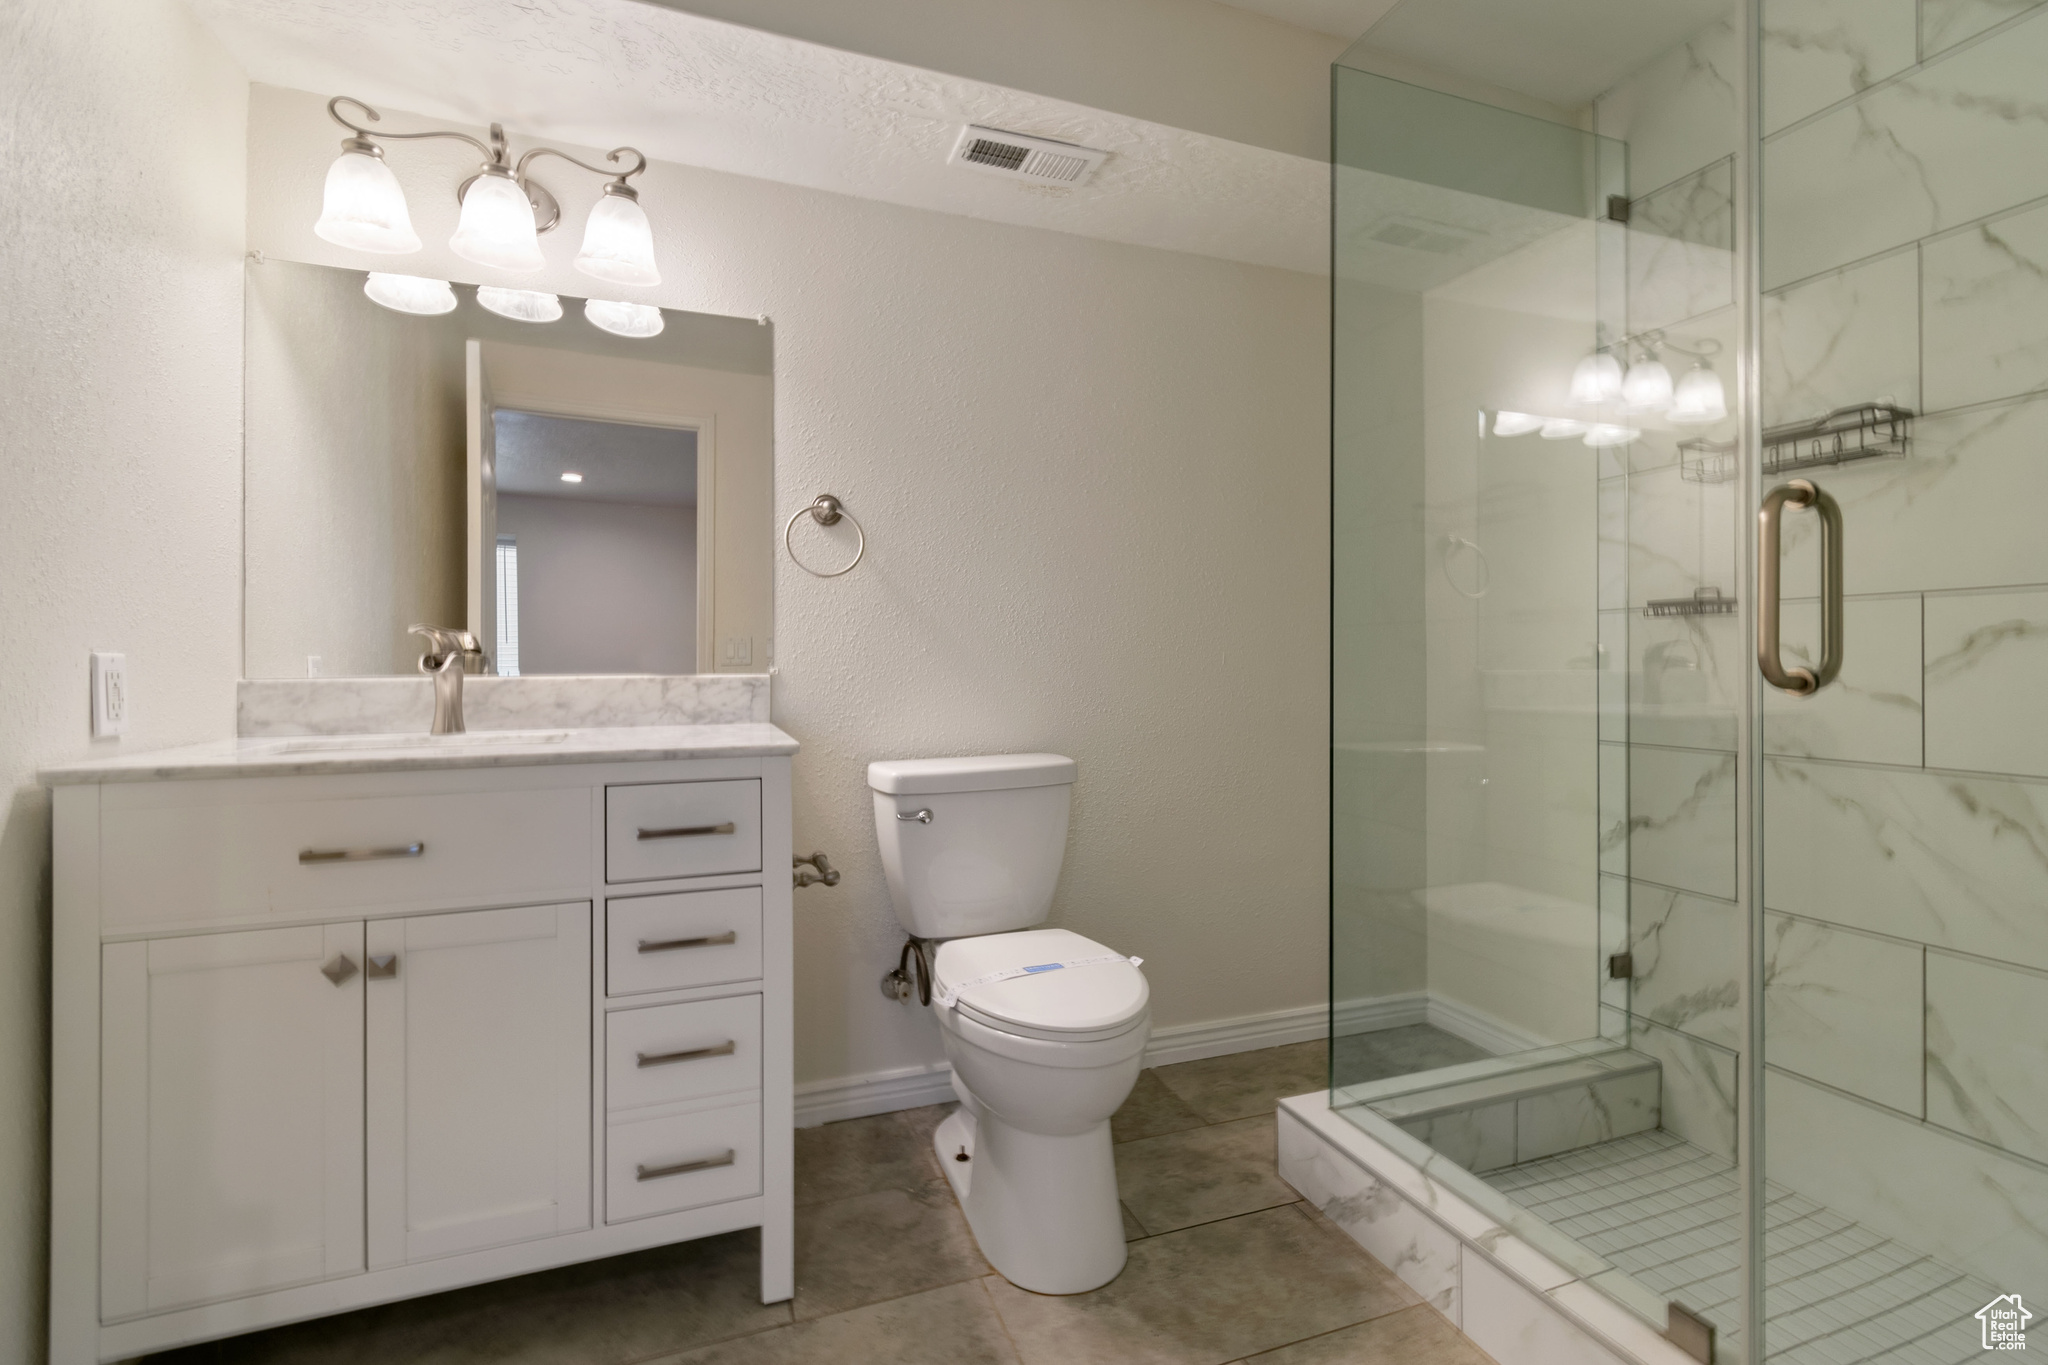 Bathroom with a textured ceiling, tile floors, toilet, a shower with shower door, and vanity